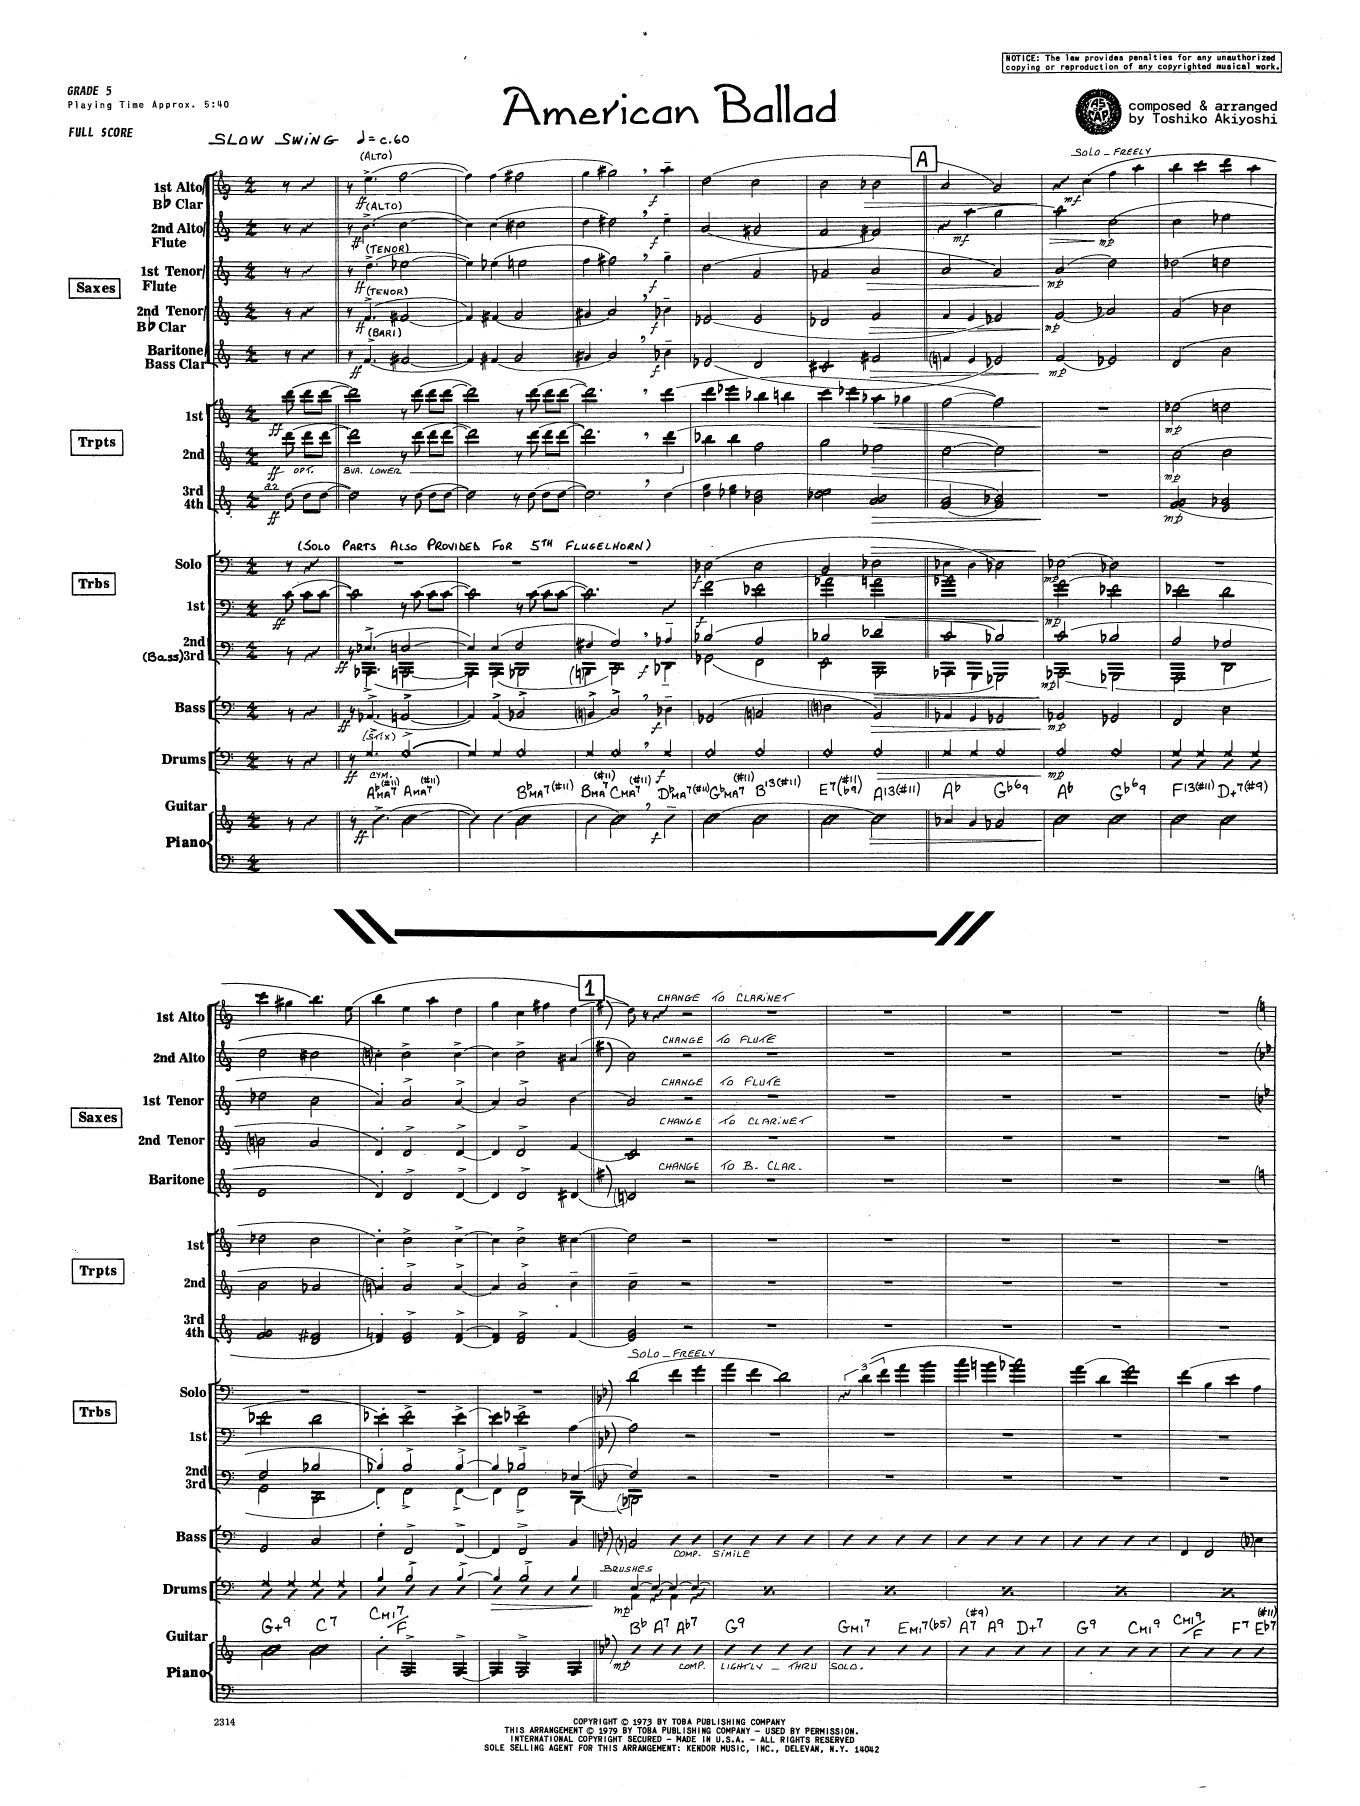 Toshiko Akiyoshi American Ballad - Full Score sheet music preview music notes and score for Jazz Ensemble including 7 page(s)